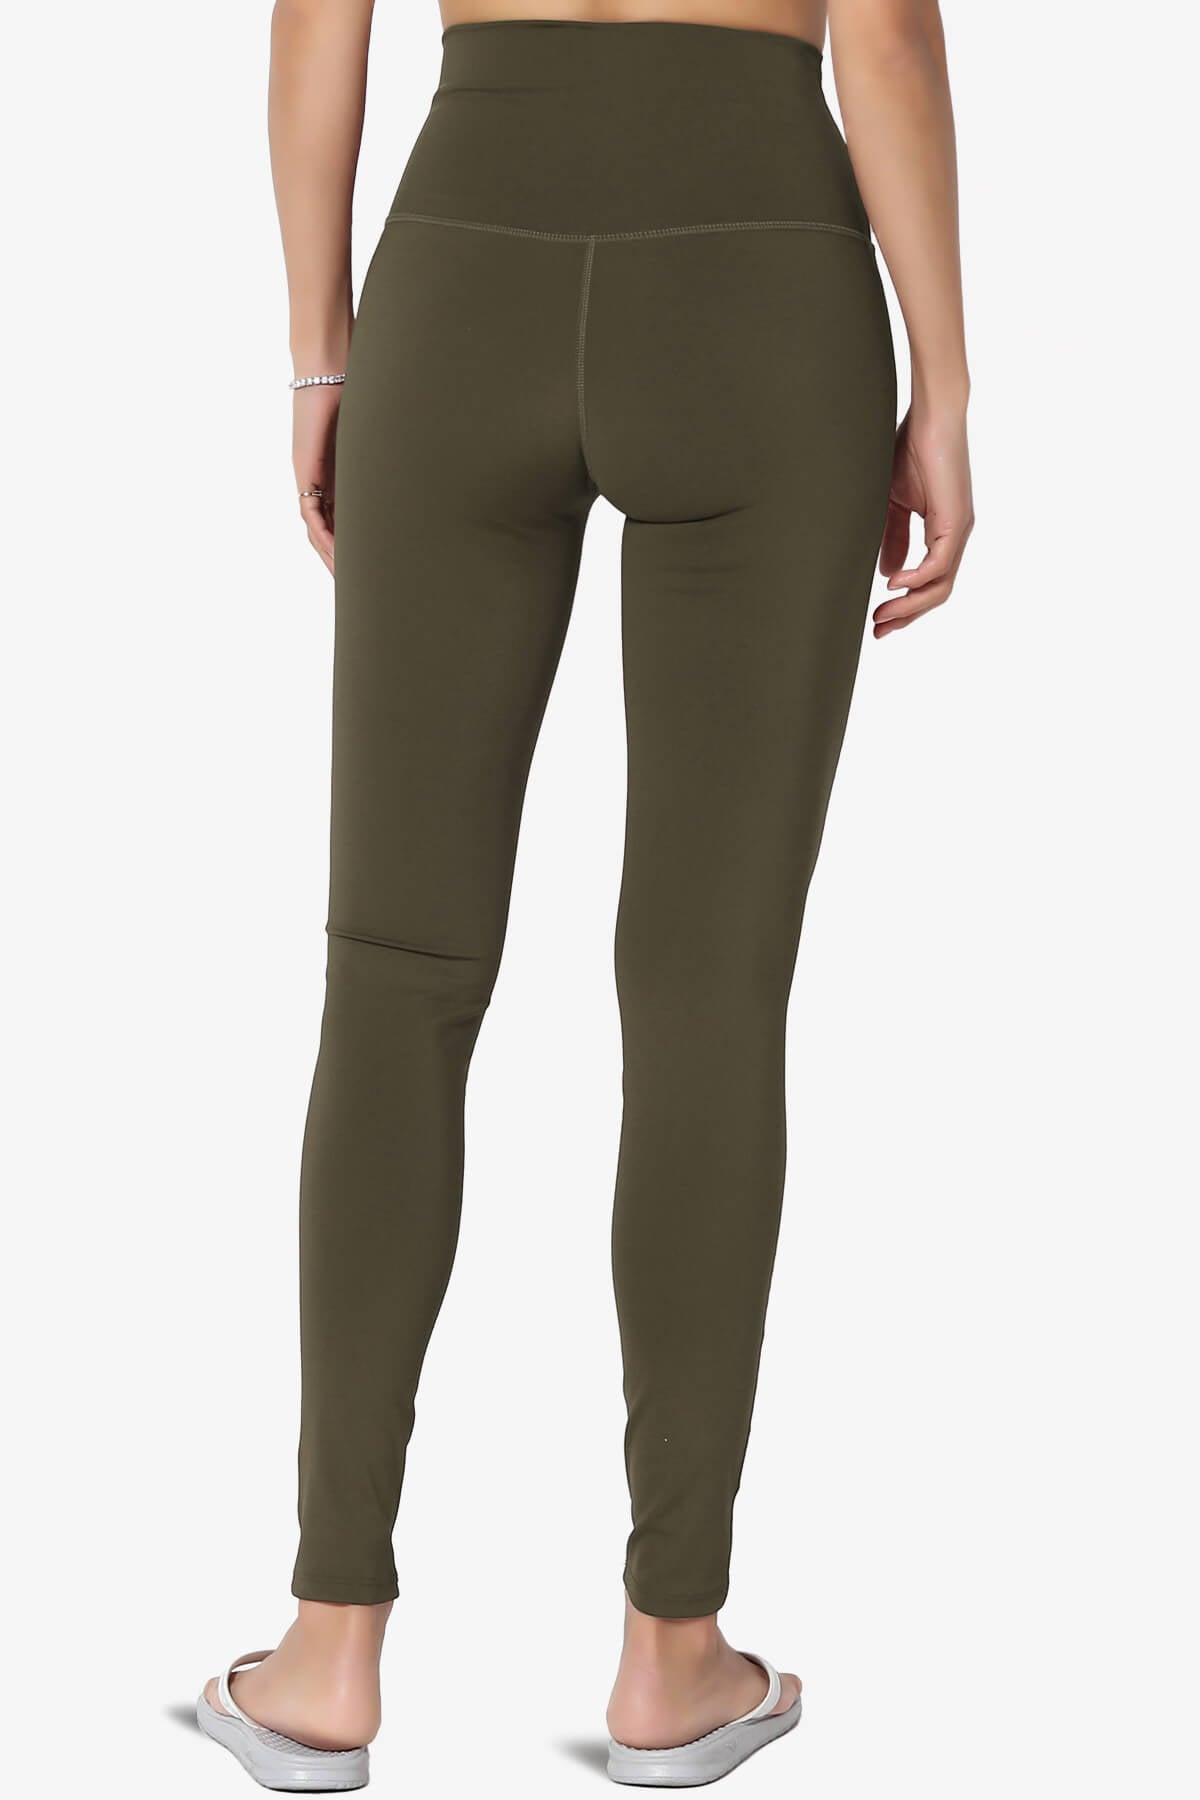 Mosco Athletic High Rise Ankle Leggings OLIVE_4